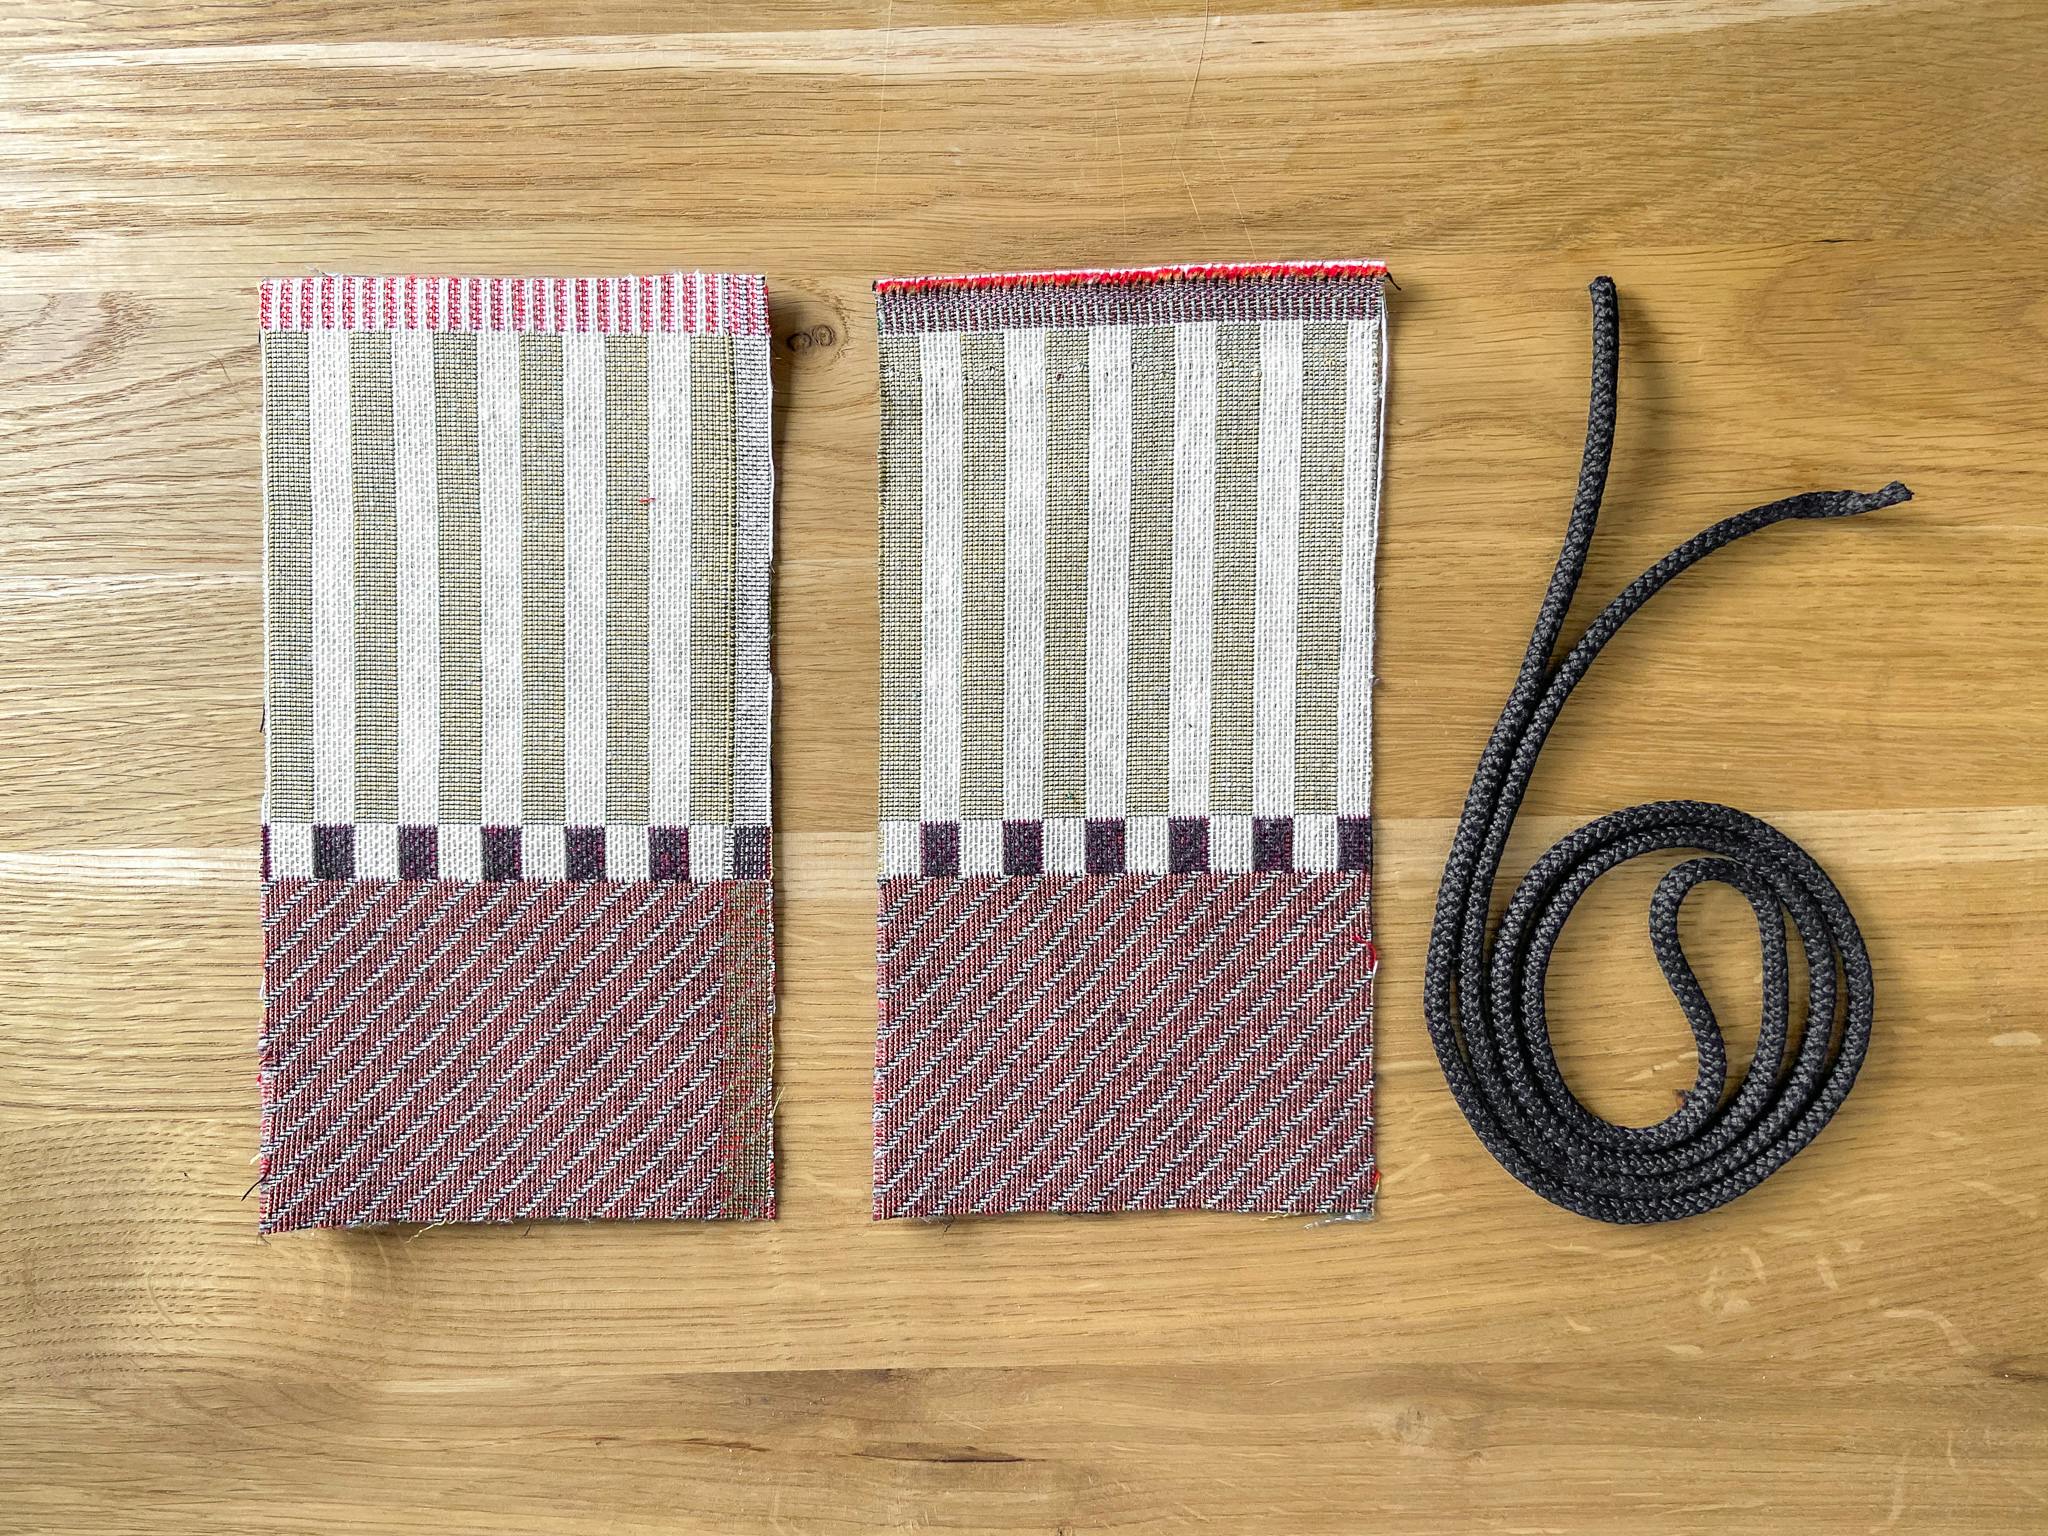  Materials needed for sewing smartphone sleeve case